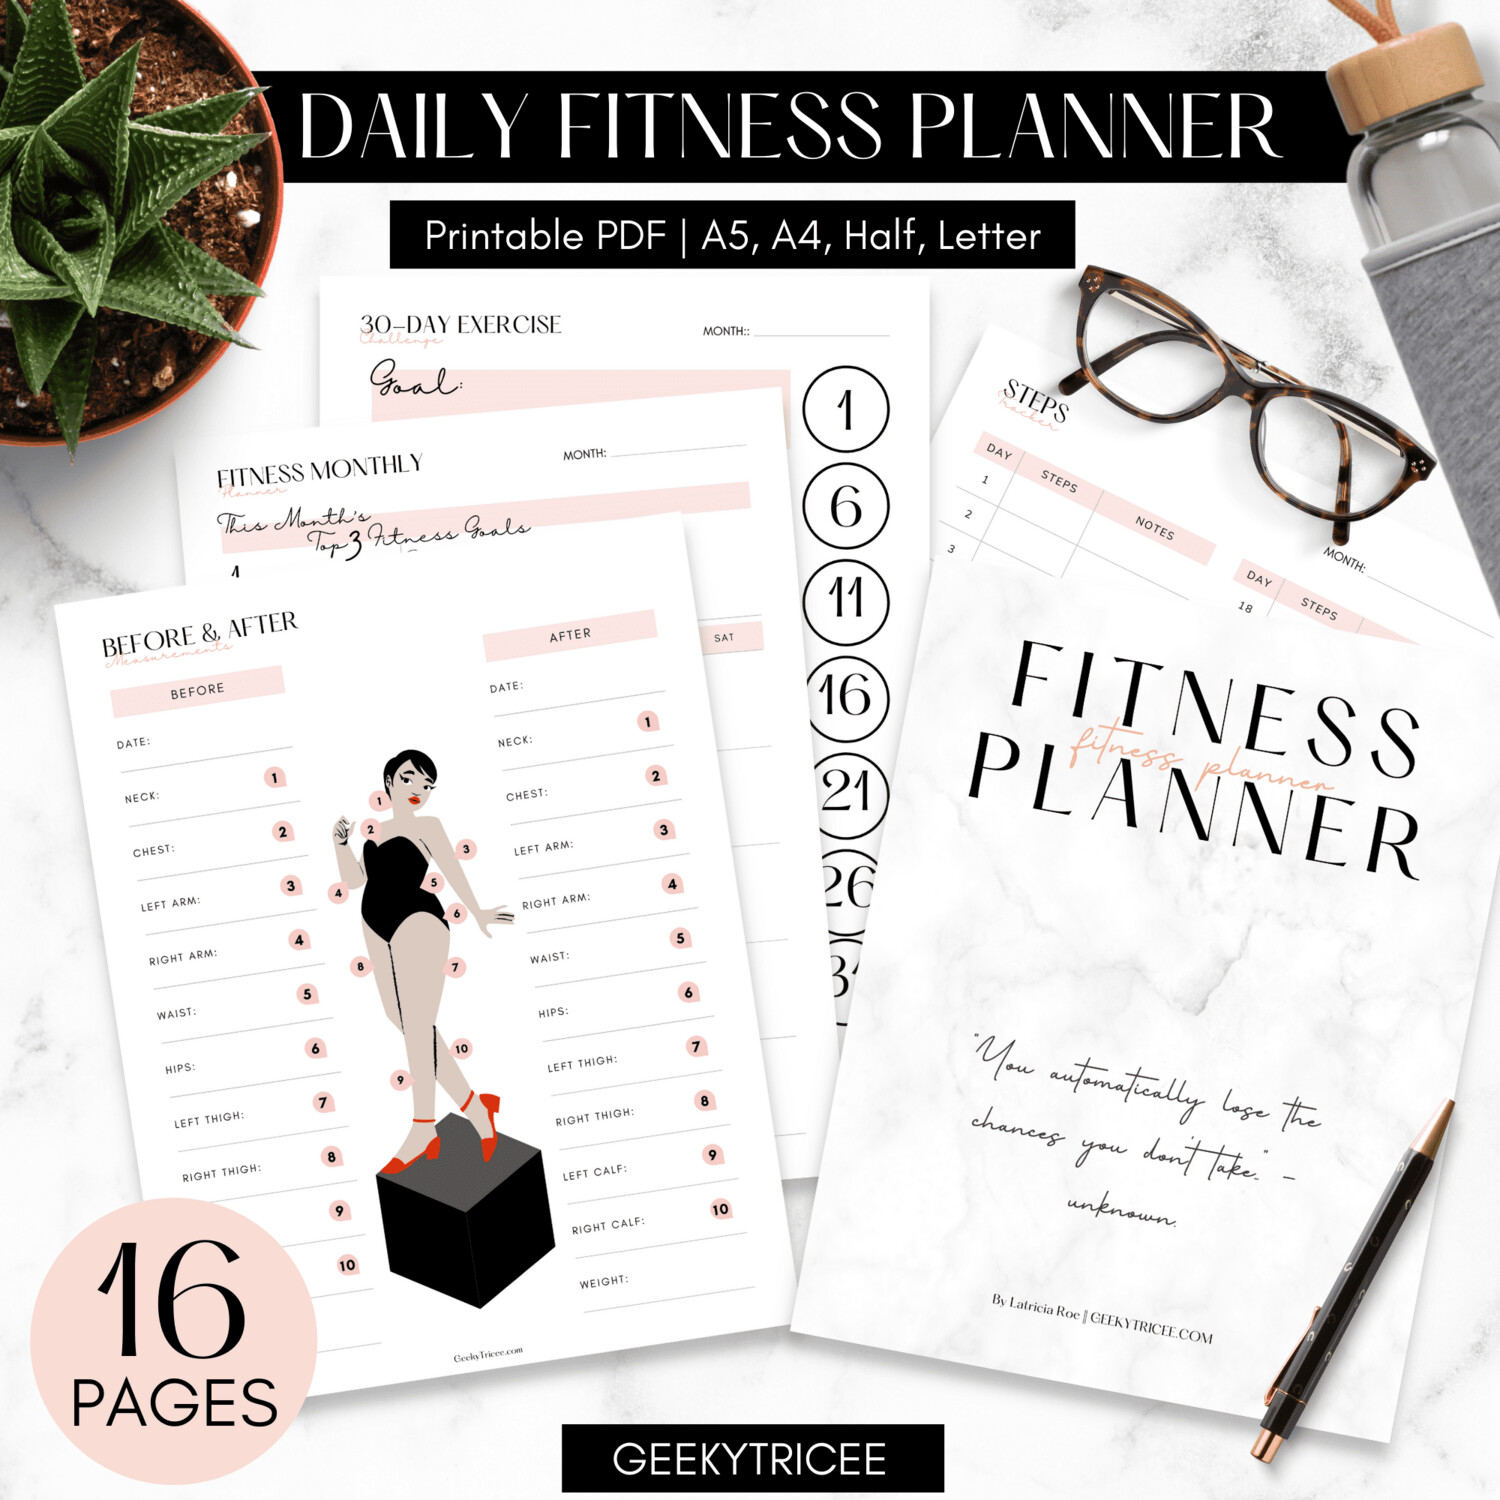 Daily Fitness Planner | A4 A5 Letter